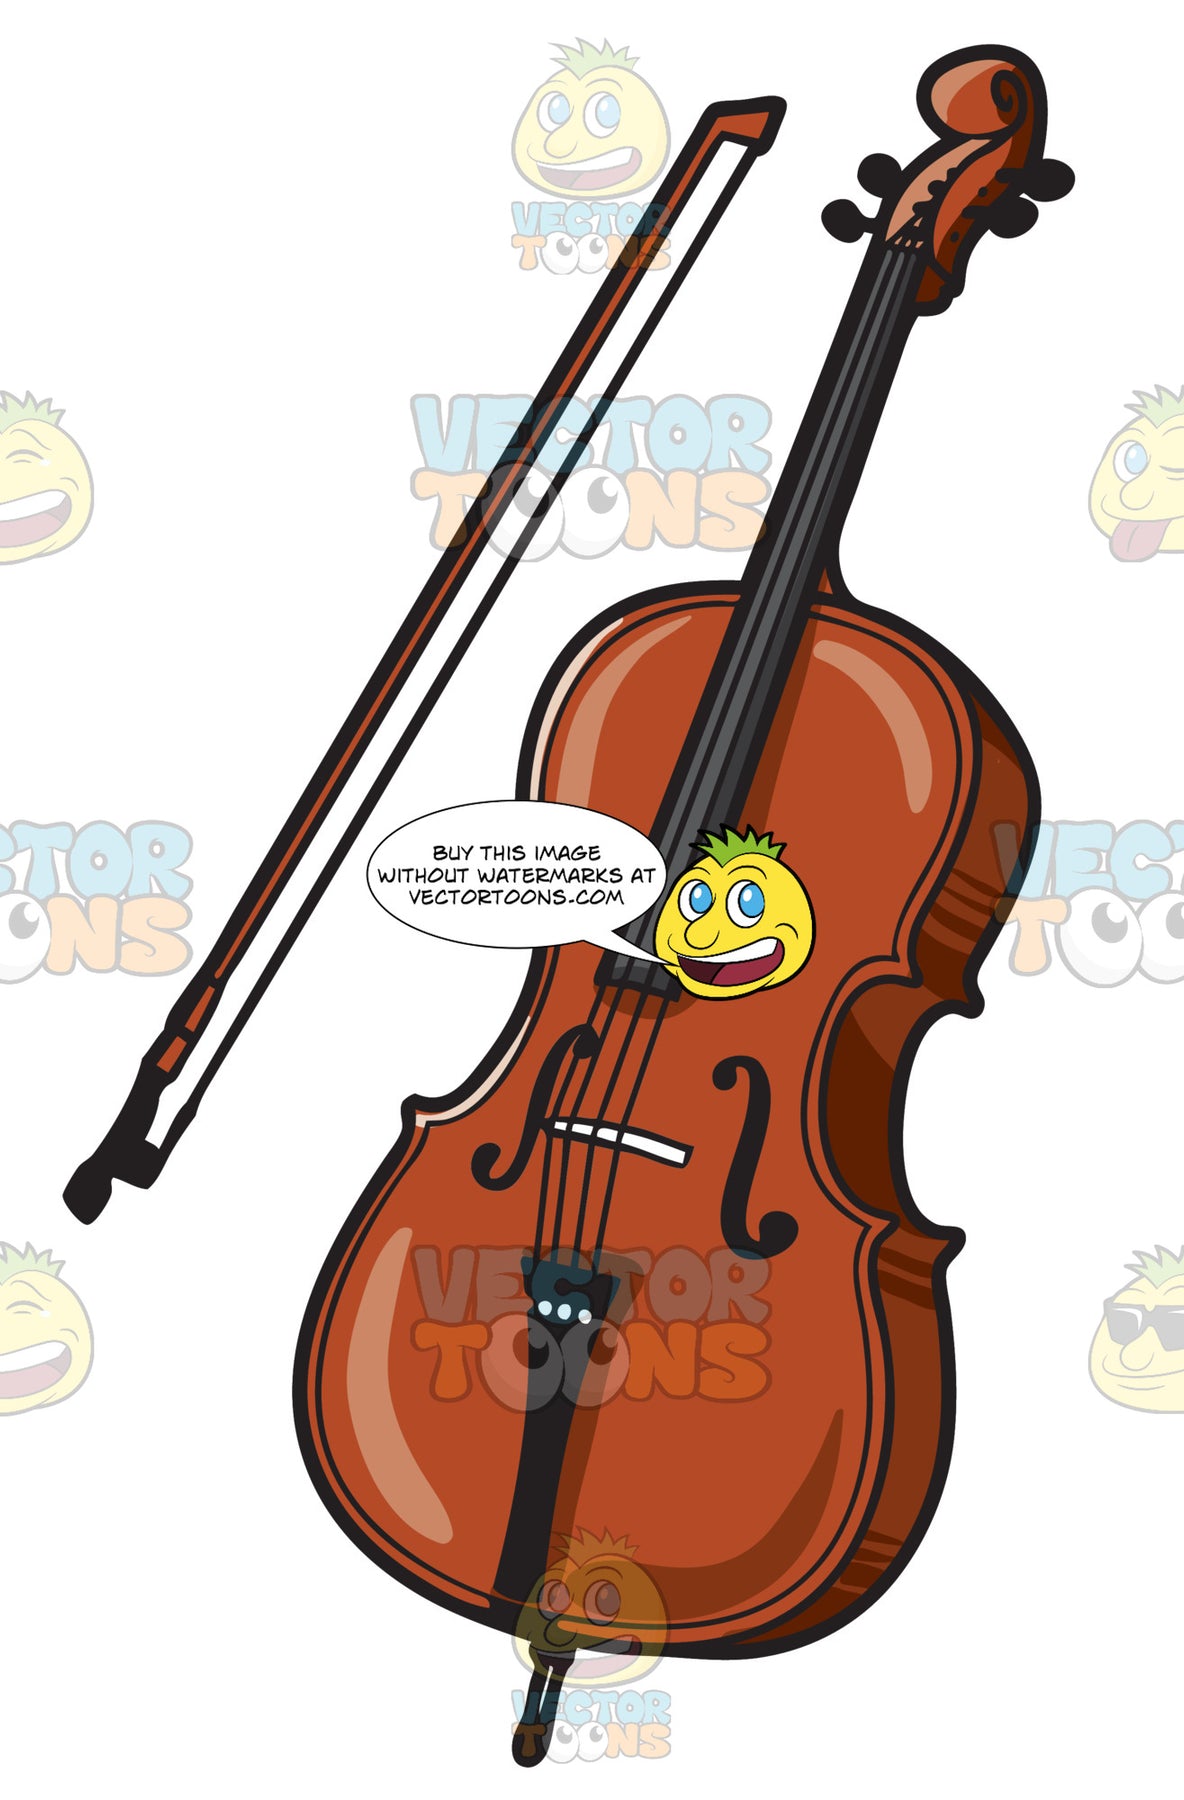 Cartoon: A Musical Instrument Called The Cello | Clipart Images